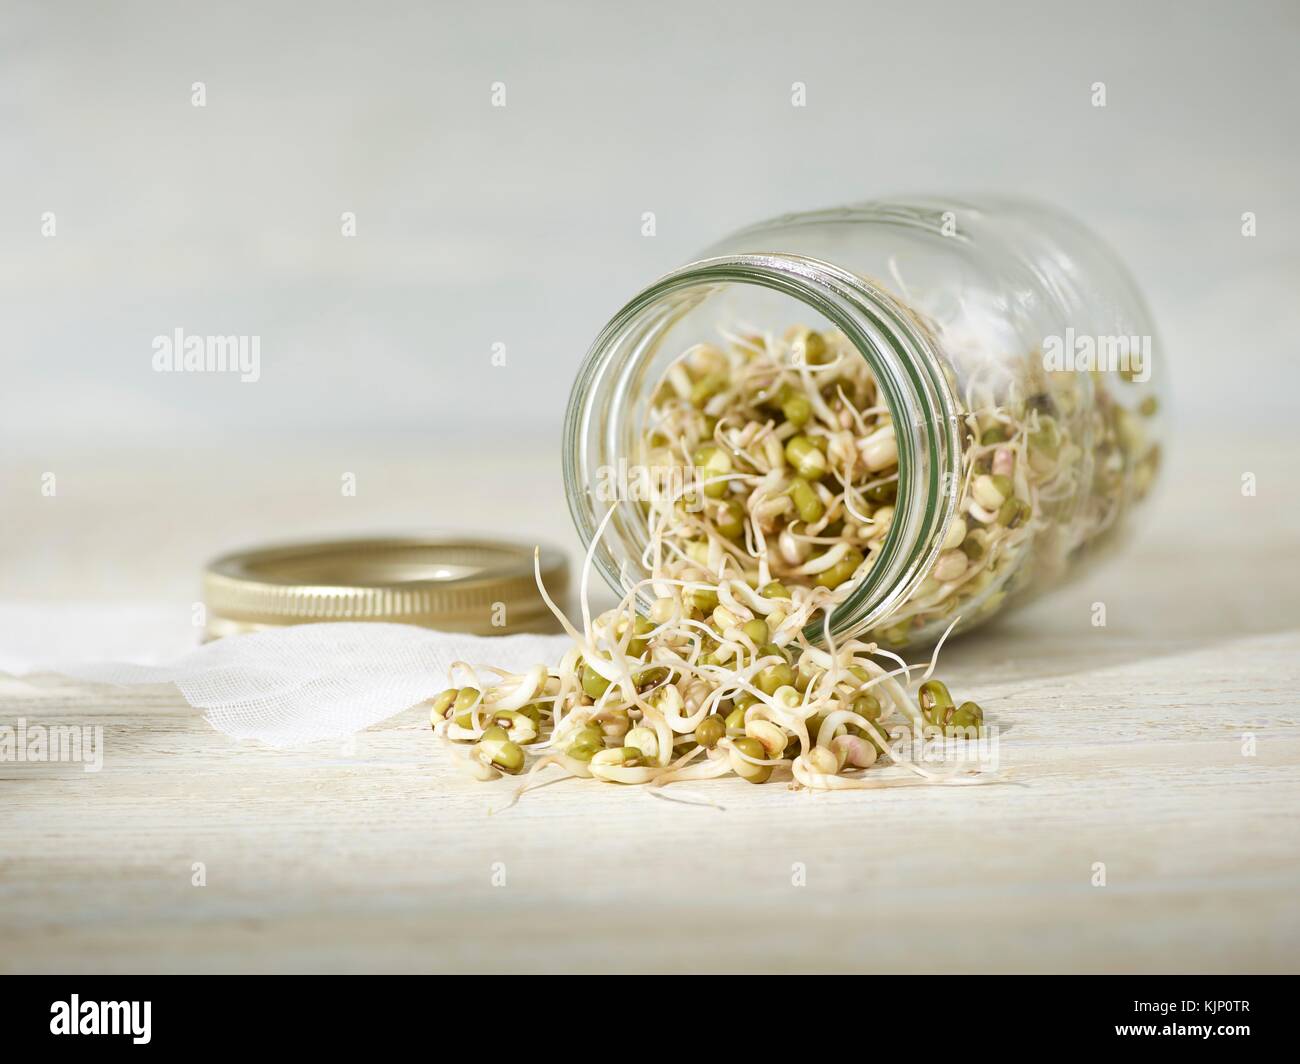 Sprouting mung beans spilling out from a jar. Stock Photo